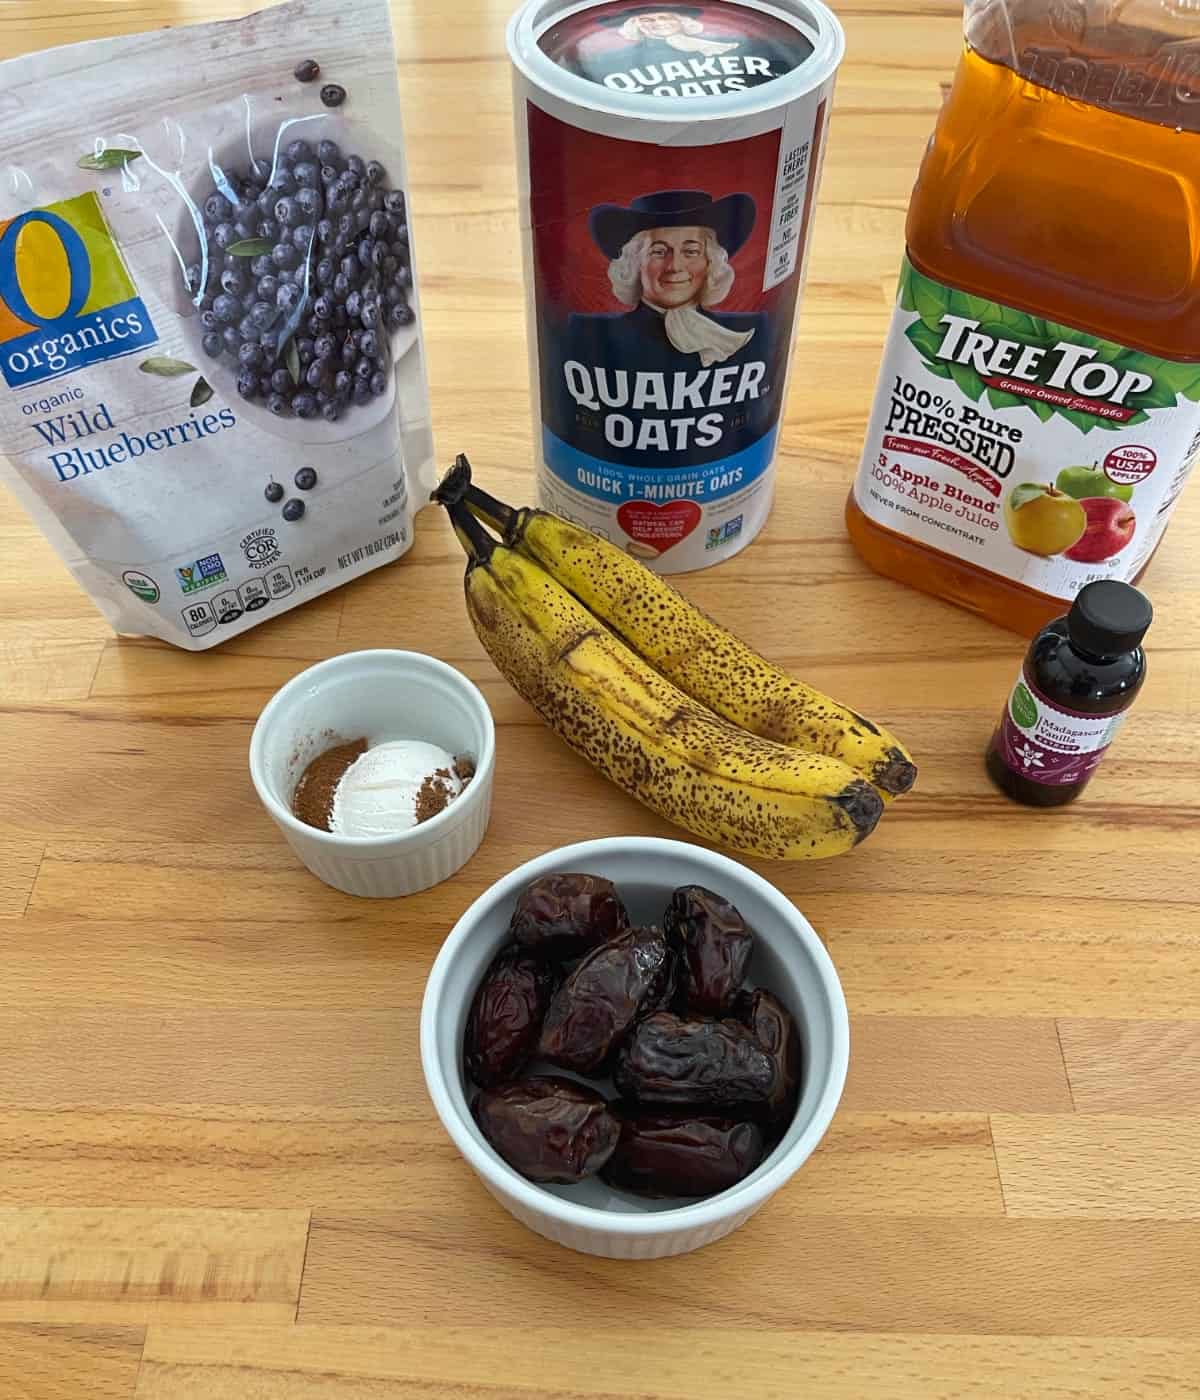 Ingredients for making baked oat squares including frozen blueberries, ripe bananas, dates, oats, apple juice and vanilla.